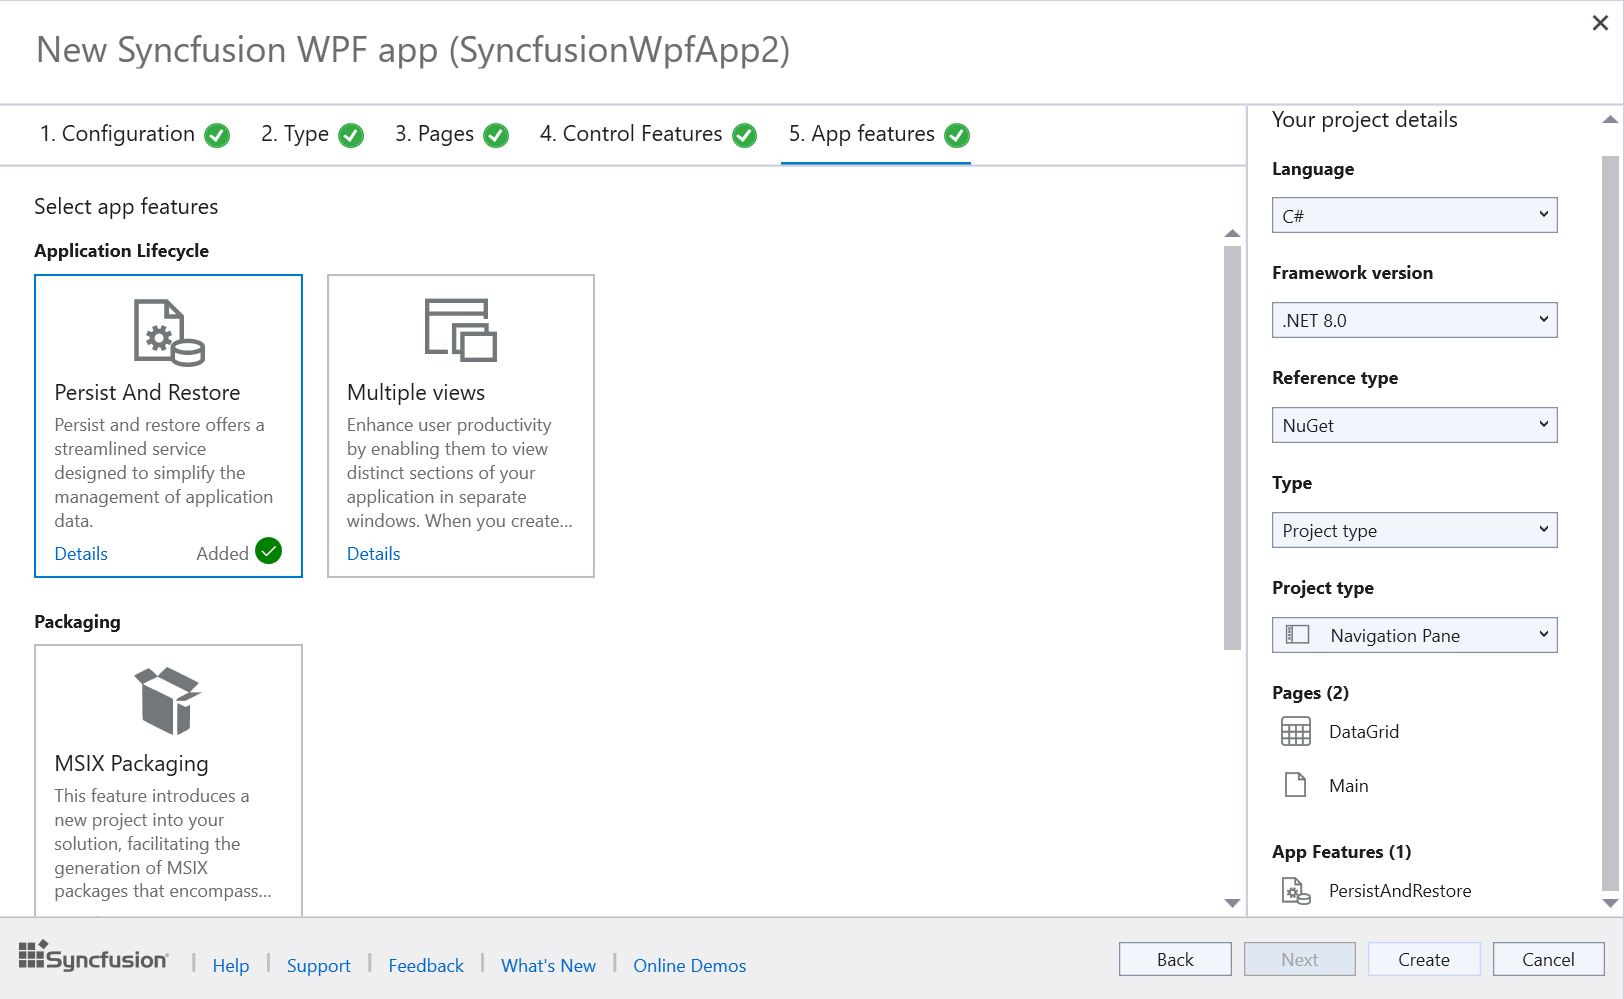 Syncfusion WinForms app features selection wizard